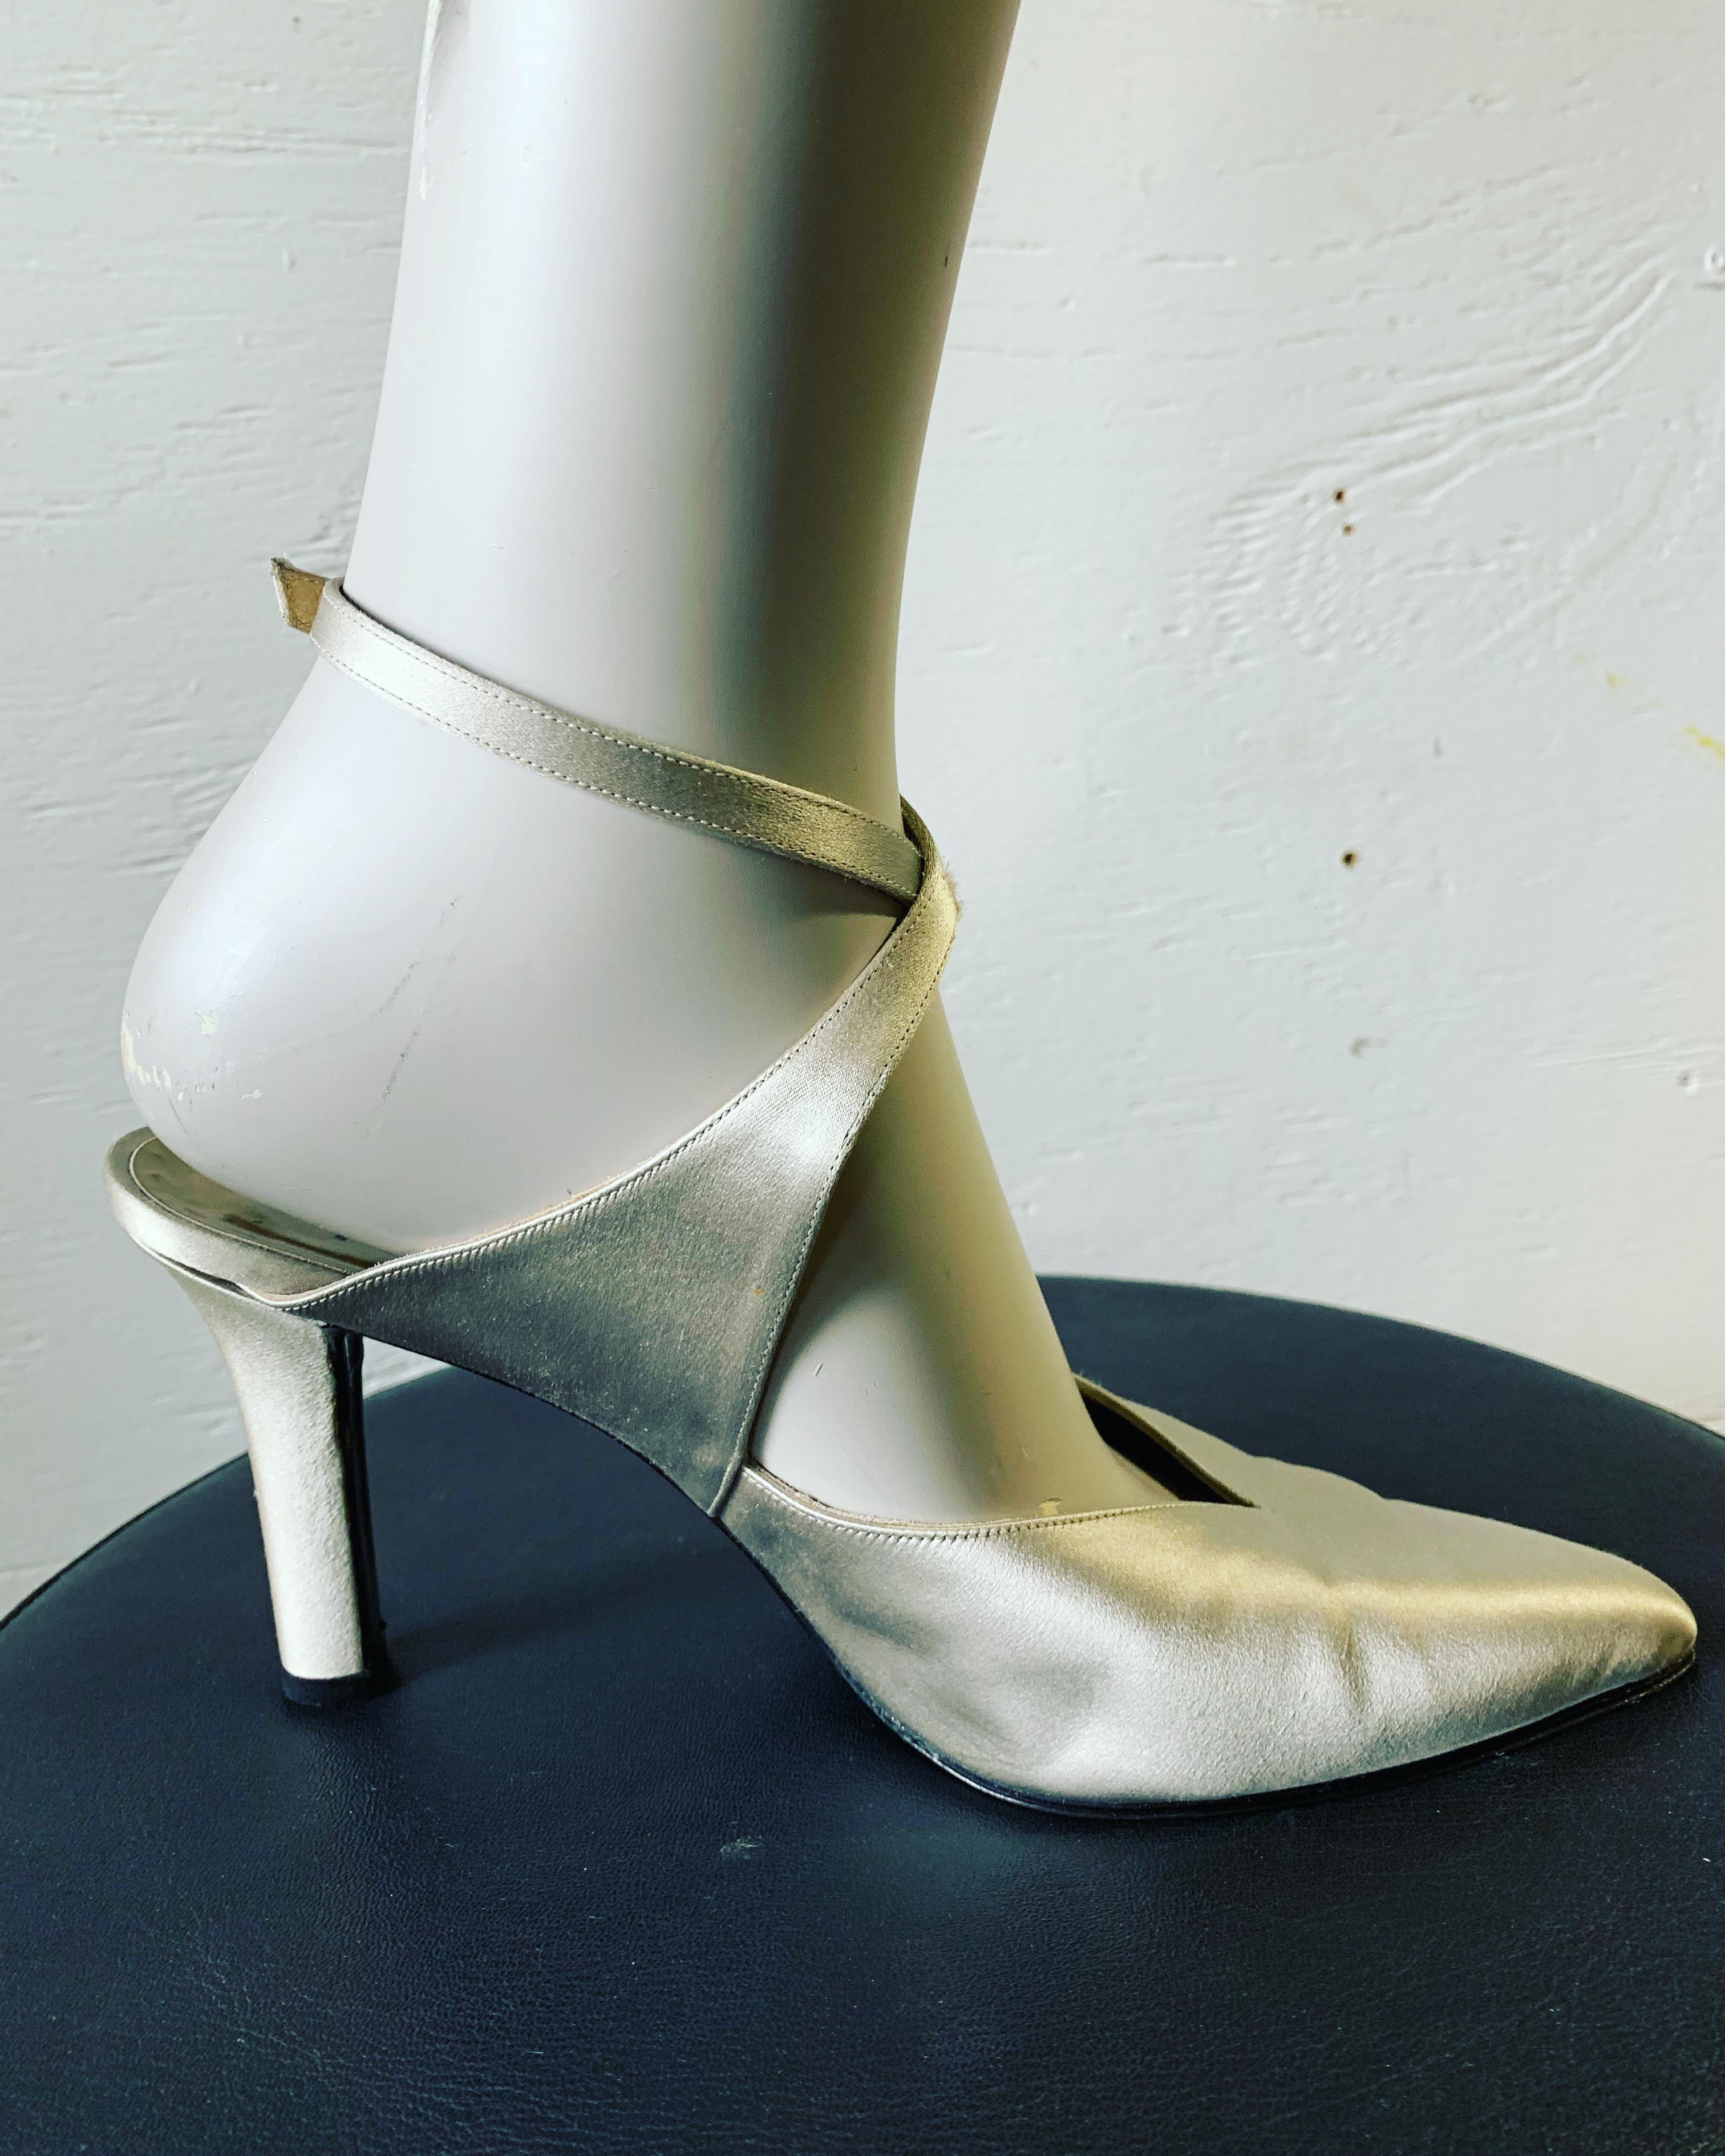 1980s Yves Saint Laurent Silver Satin Ankle-Cross Stillettos W/ Pointed Toe For Sale 1